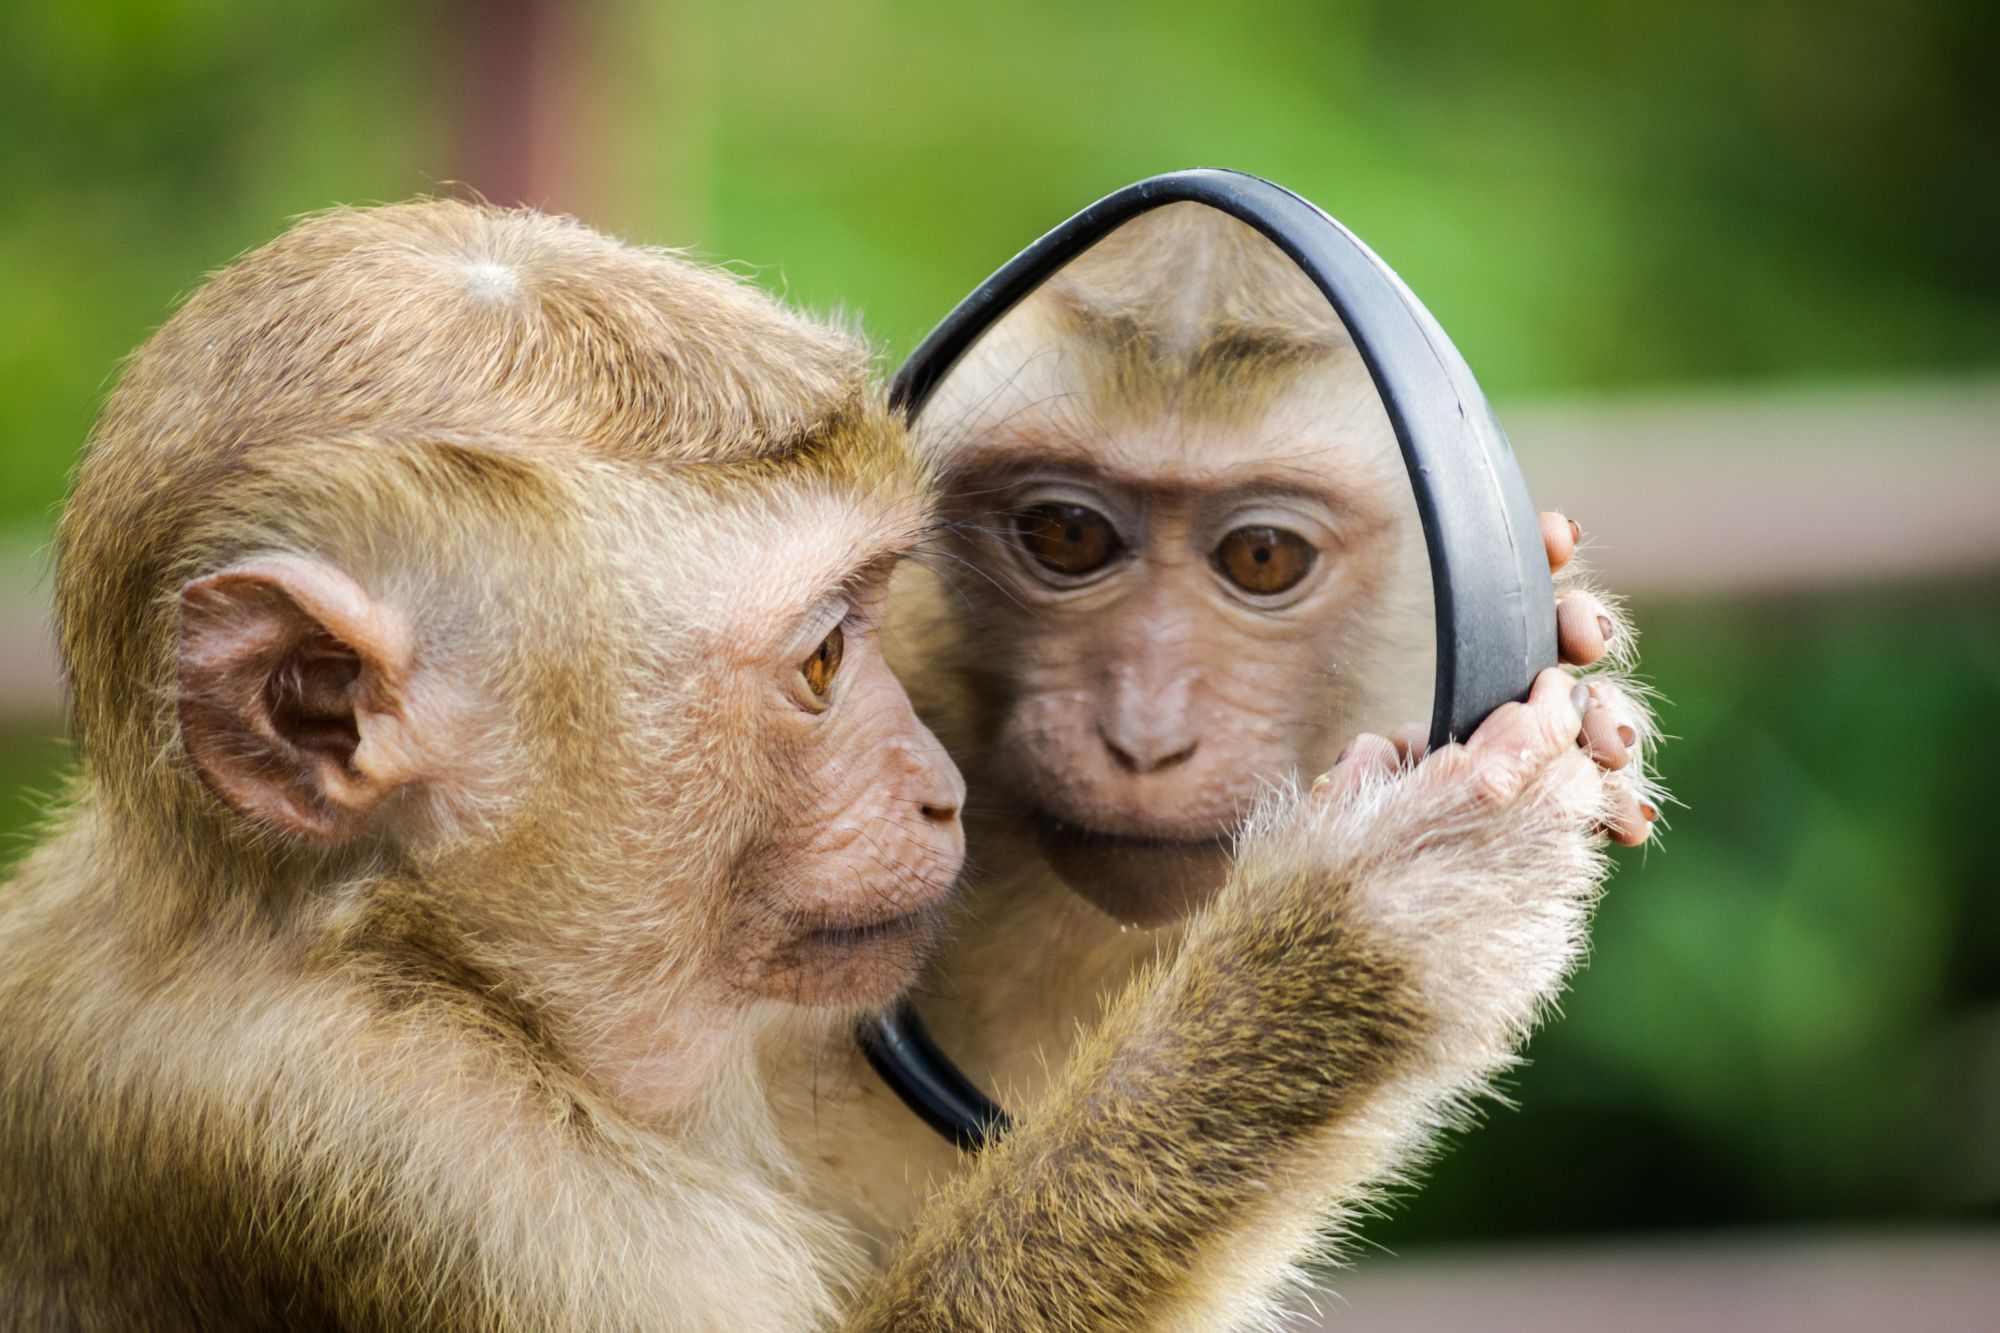 Monkey holding a mirror and staring at their reflection.